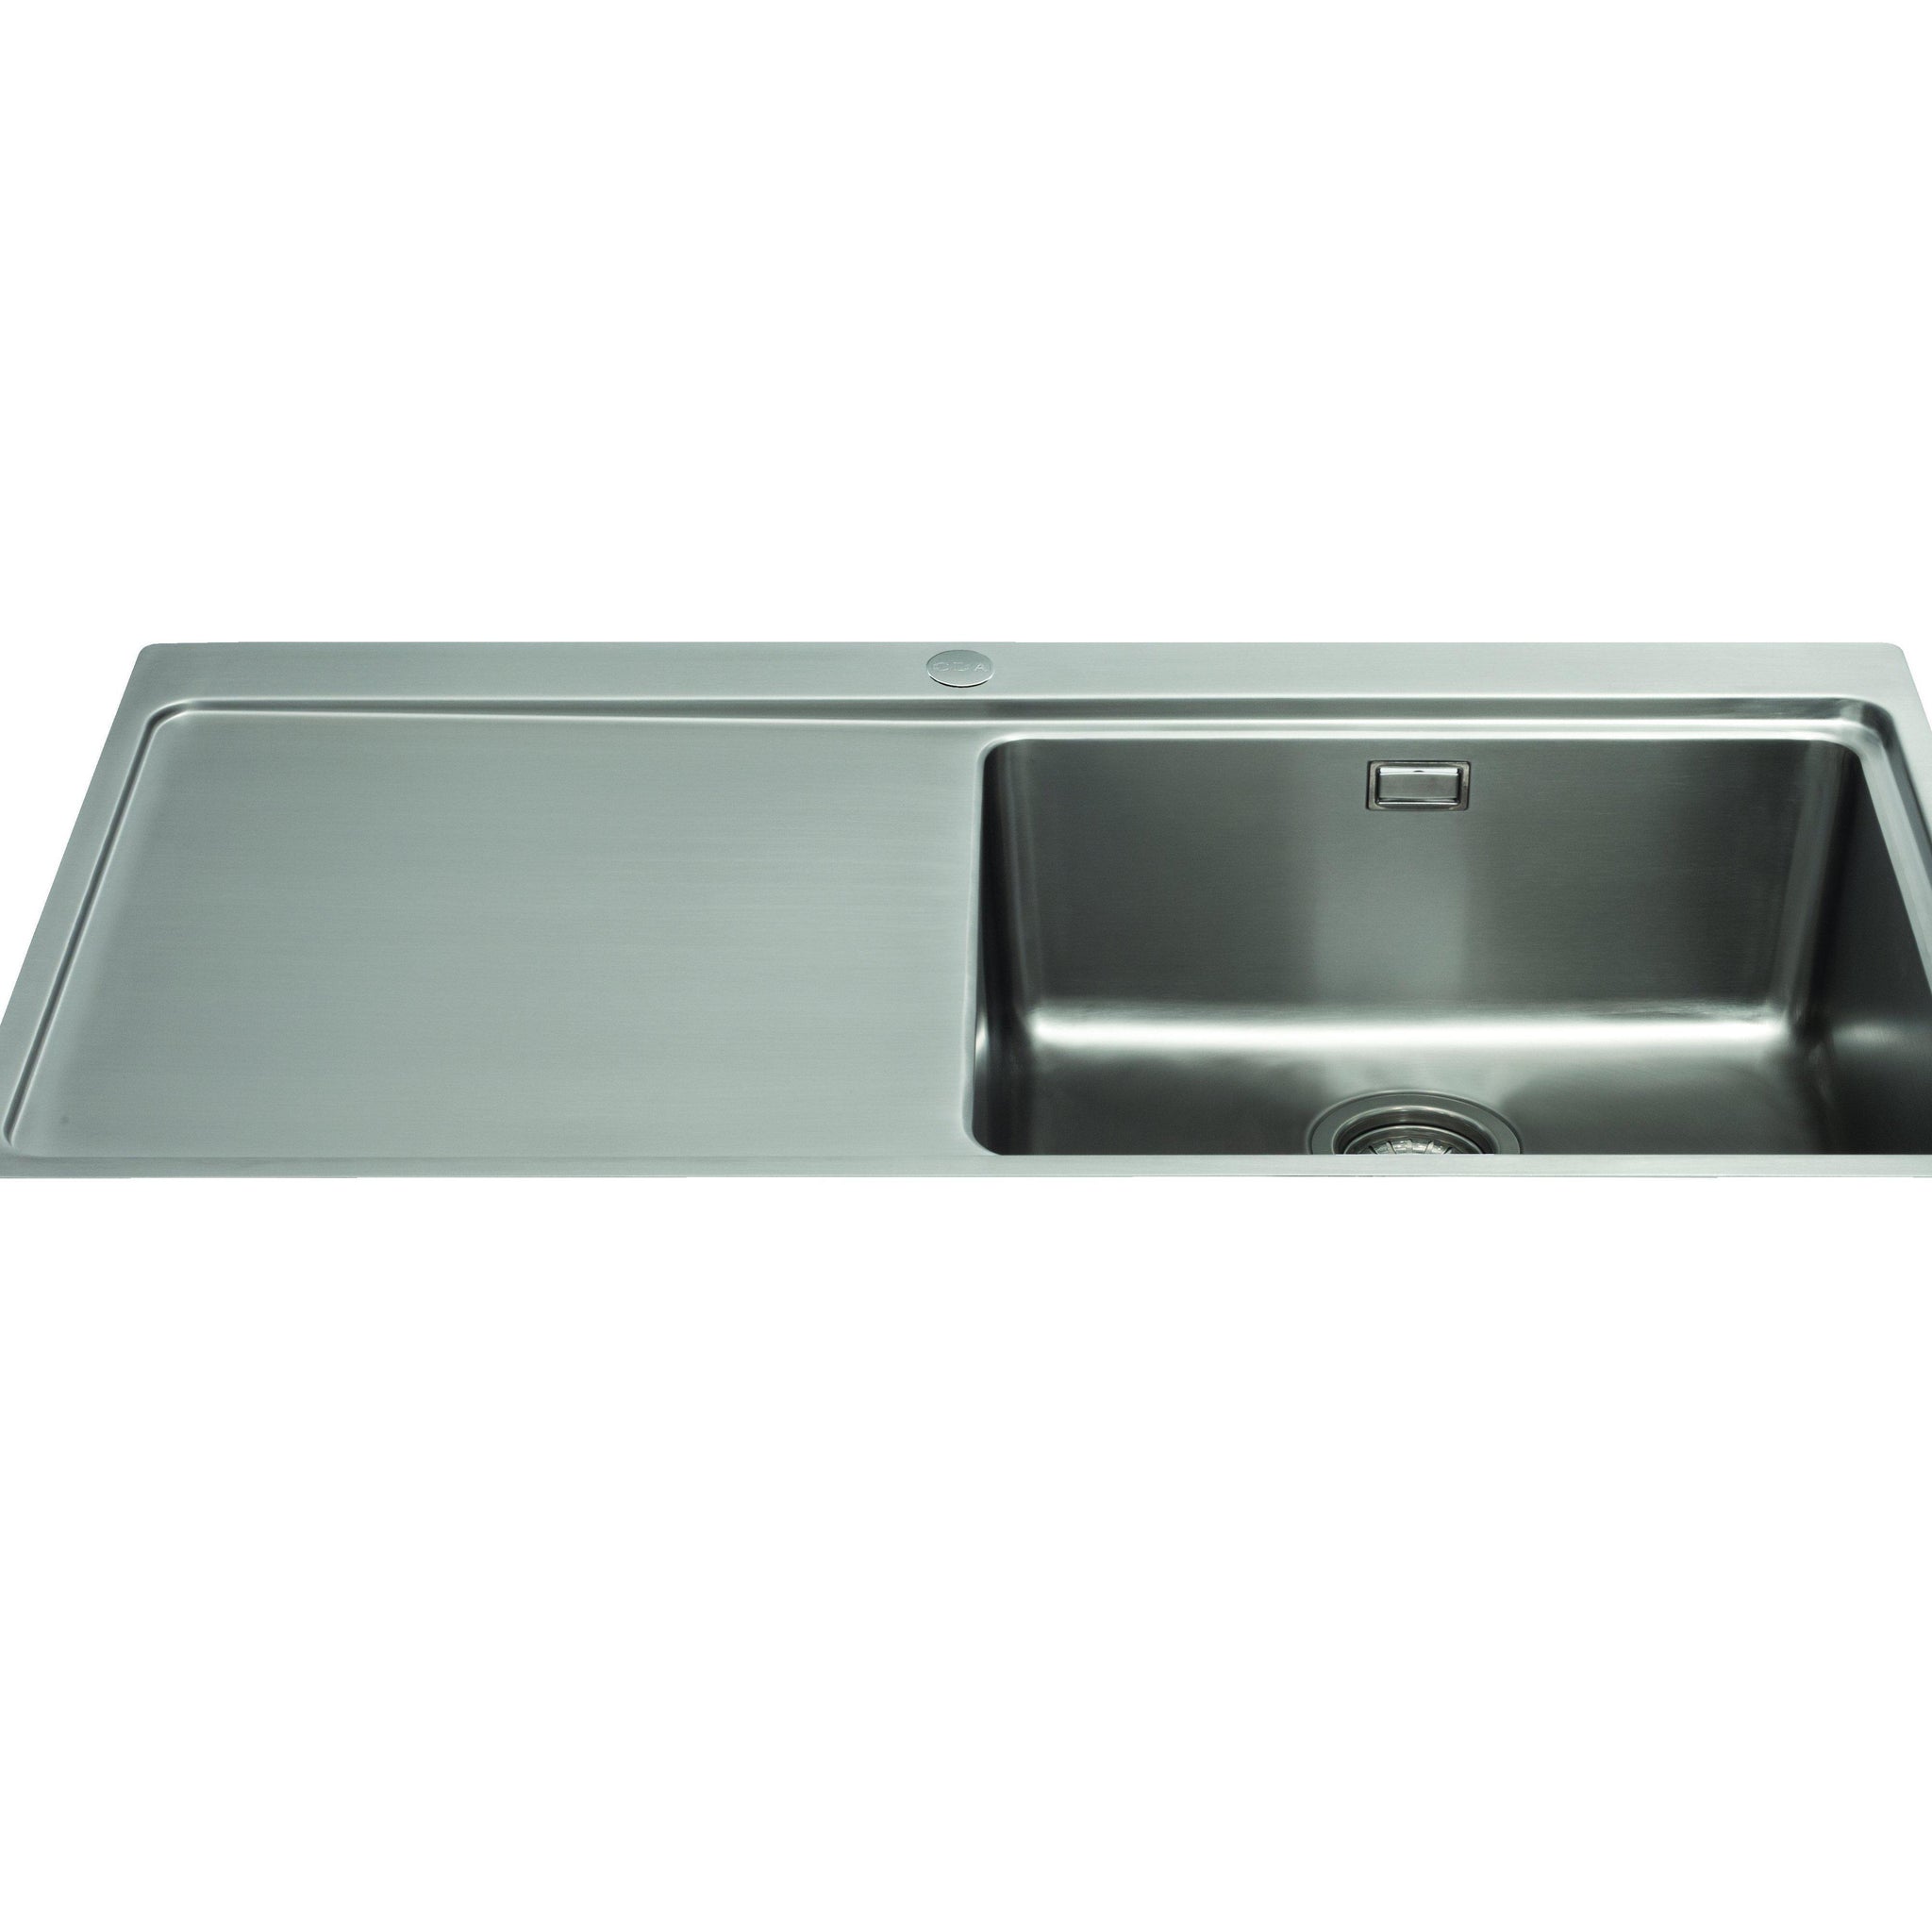 Cda Kvf21lss Single Bowl Flush Fit Sink With Left Hand Drainer Stainless Steel